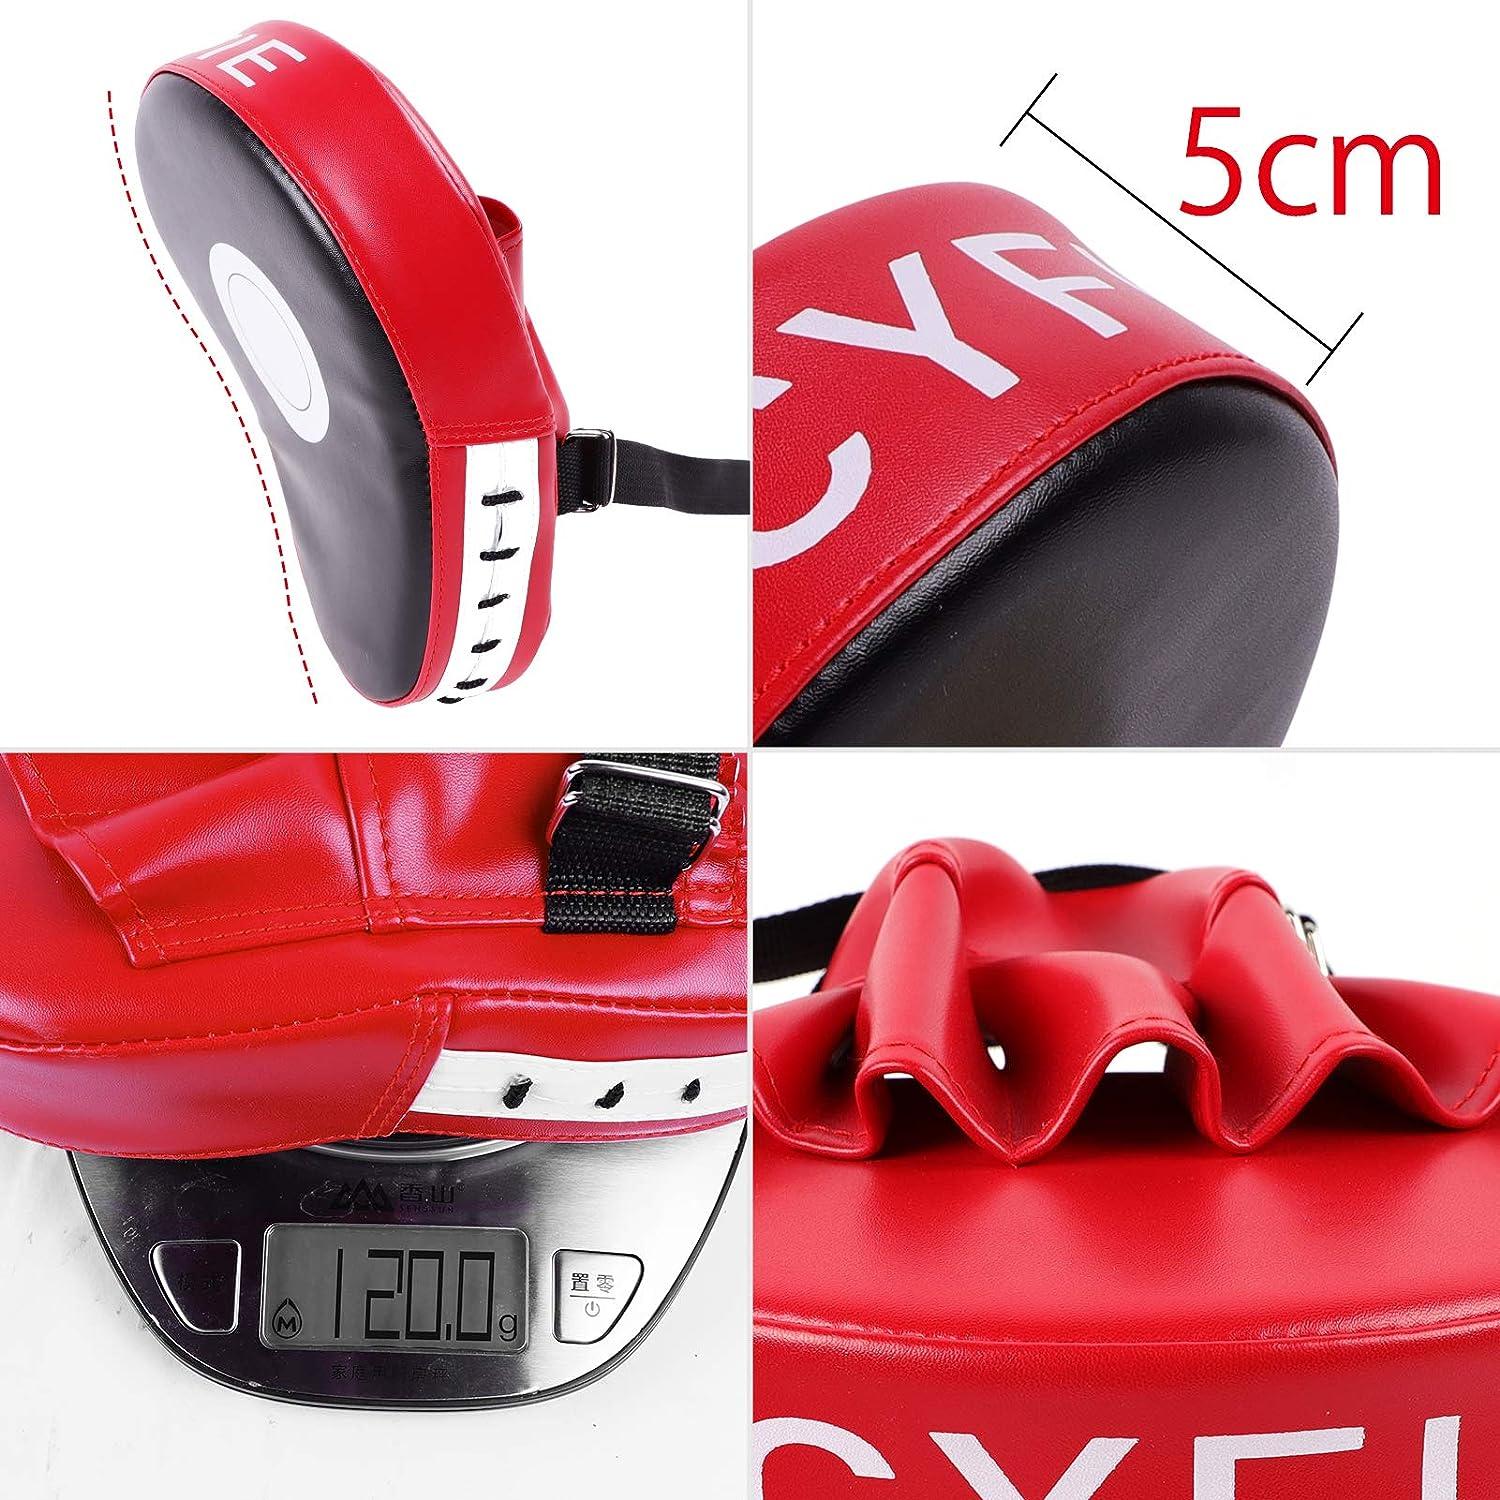 Lidylinashop Pao Boxe Patte d'ours Boxe Sparring Pads Punch Pads Boxing  Gifts for Men Thai Pads Target Mitt Glove Martial Arts Pads Focus Mitts